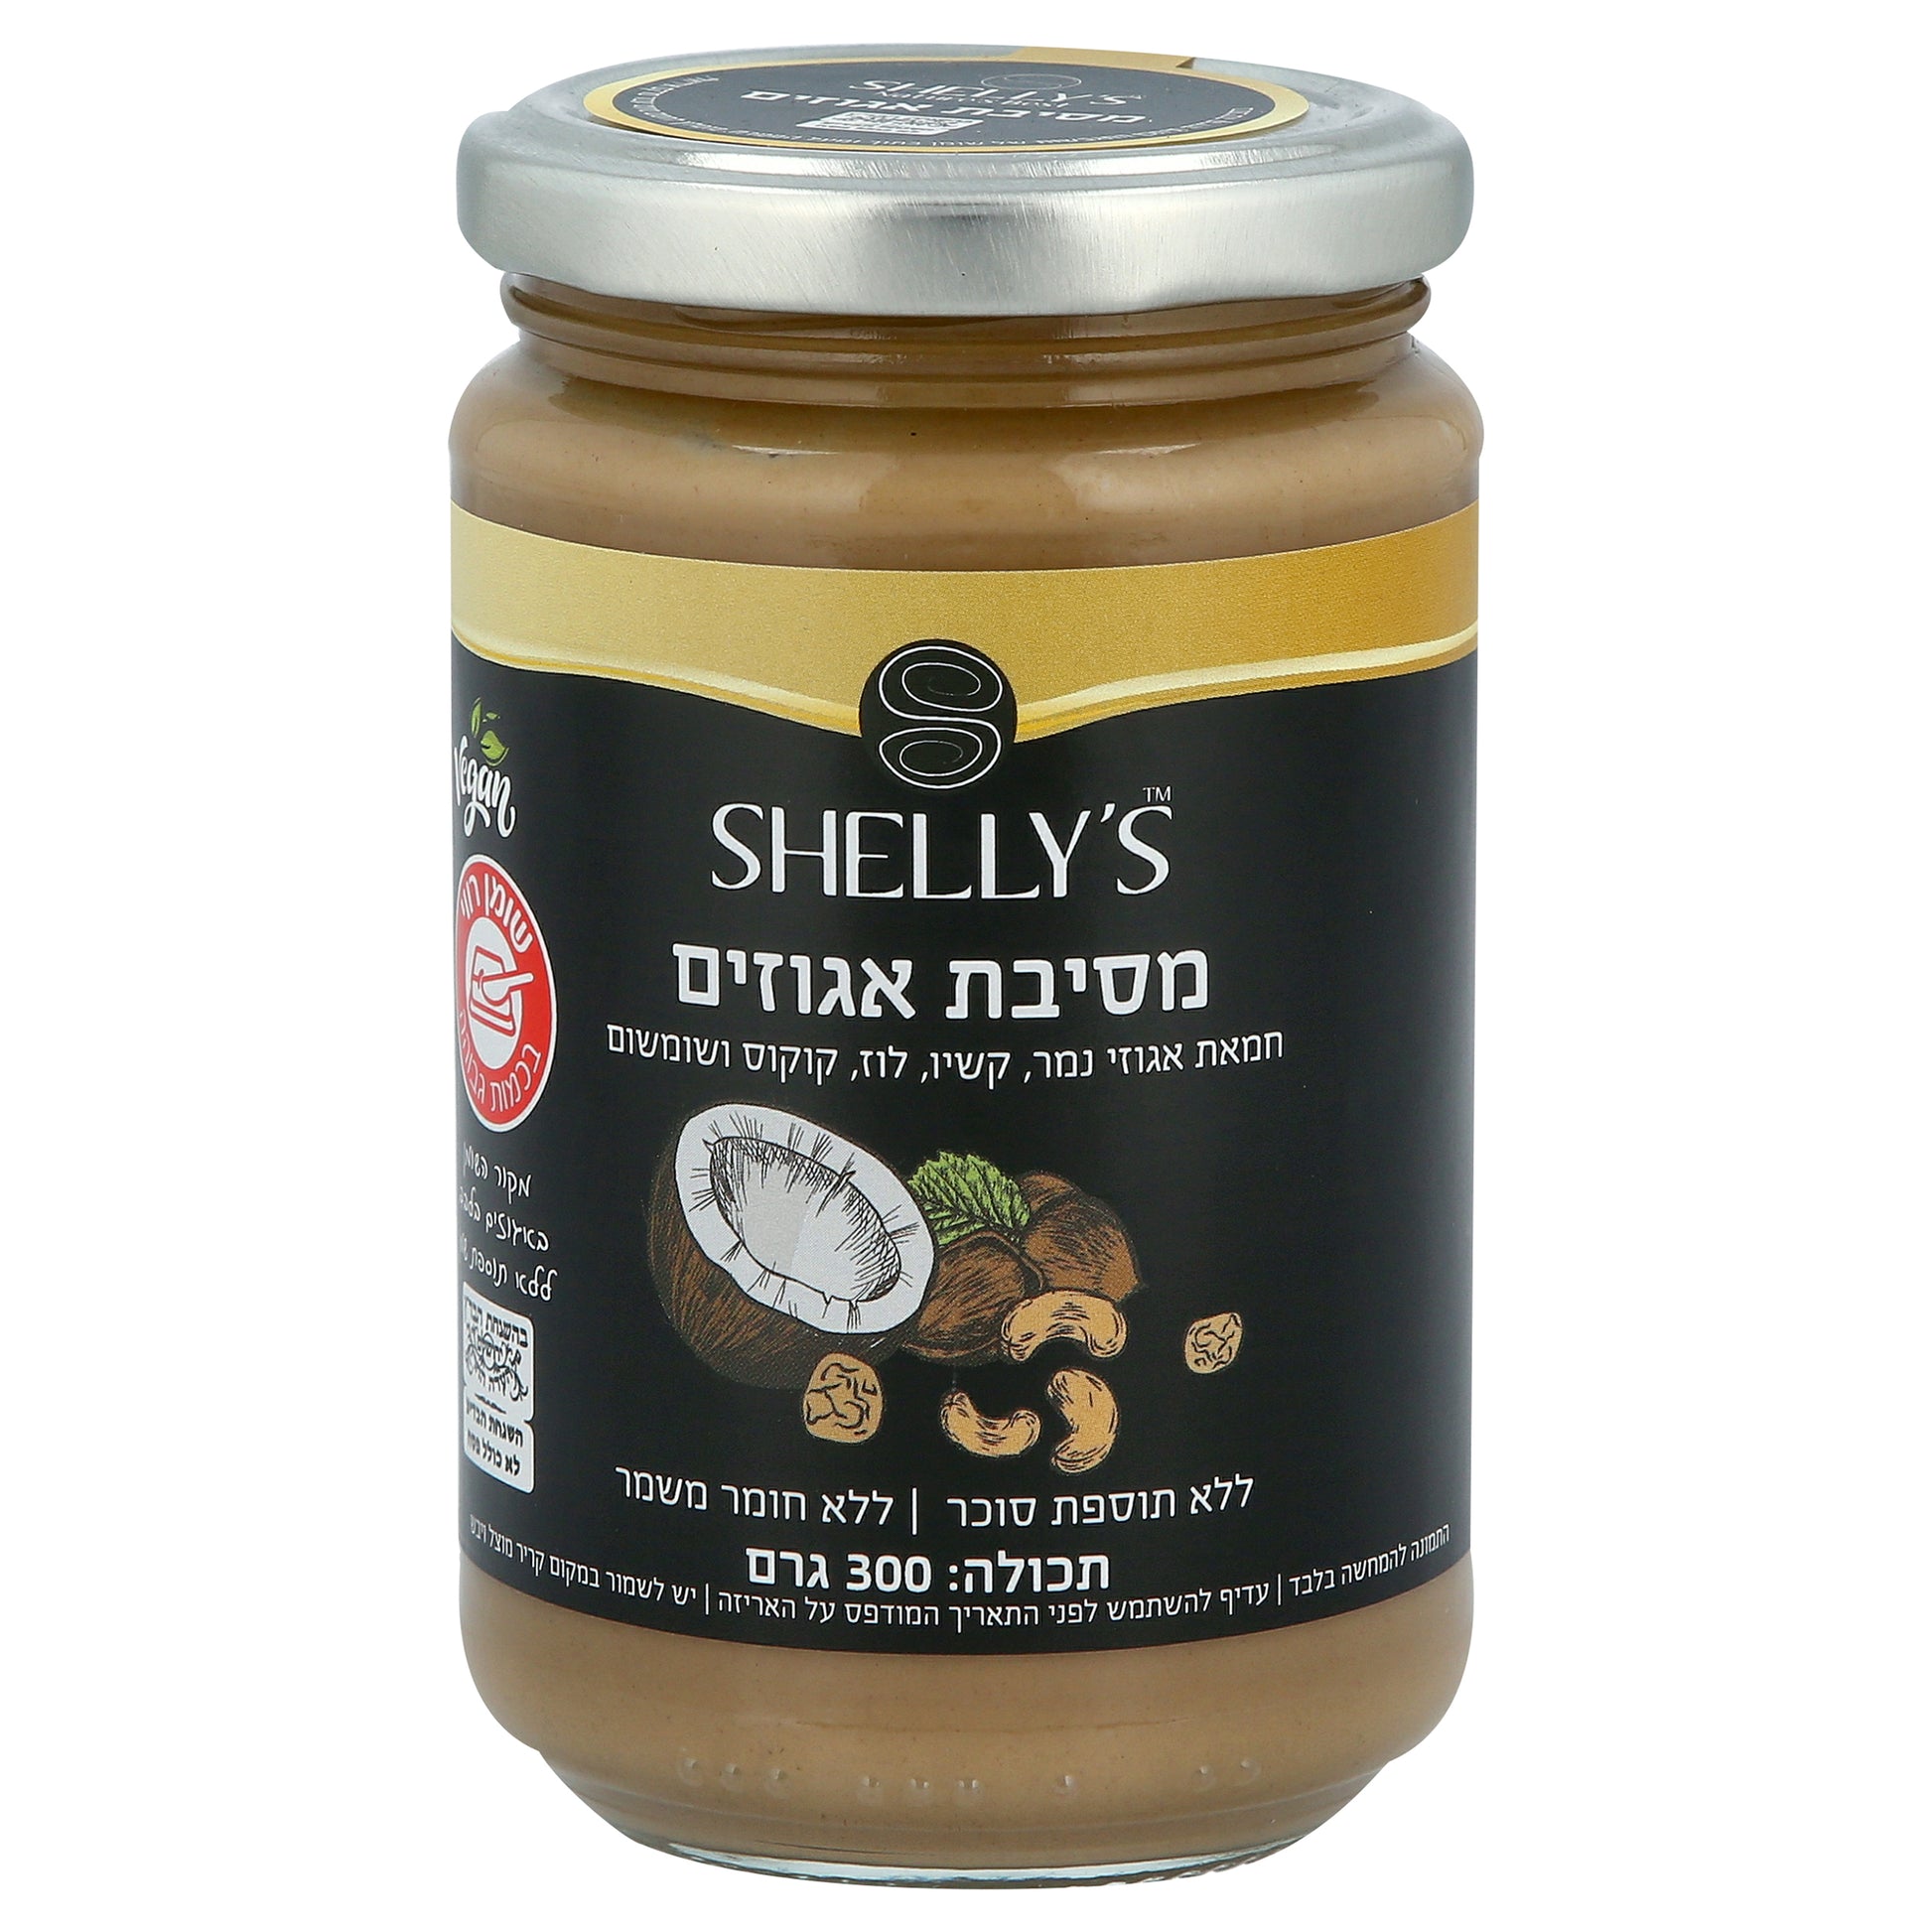 Nut Party Butter without added sugar - Shelly's - Israel Menu